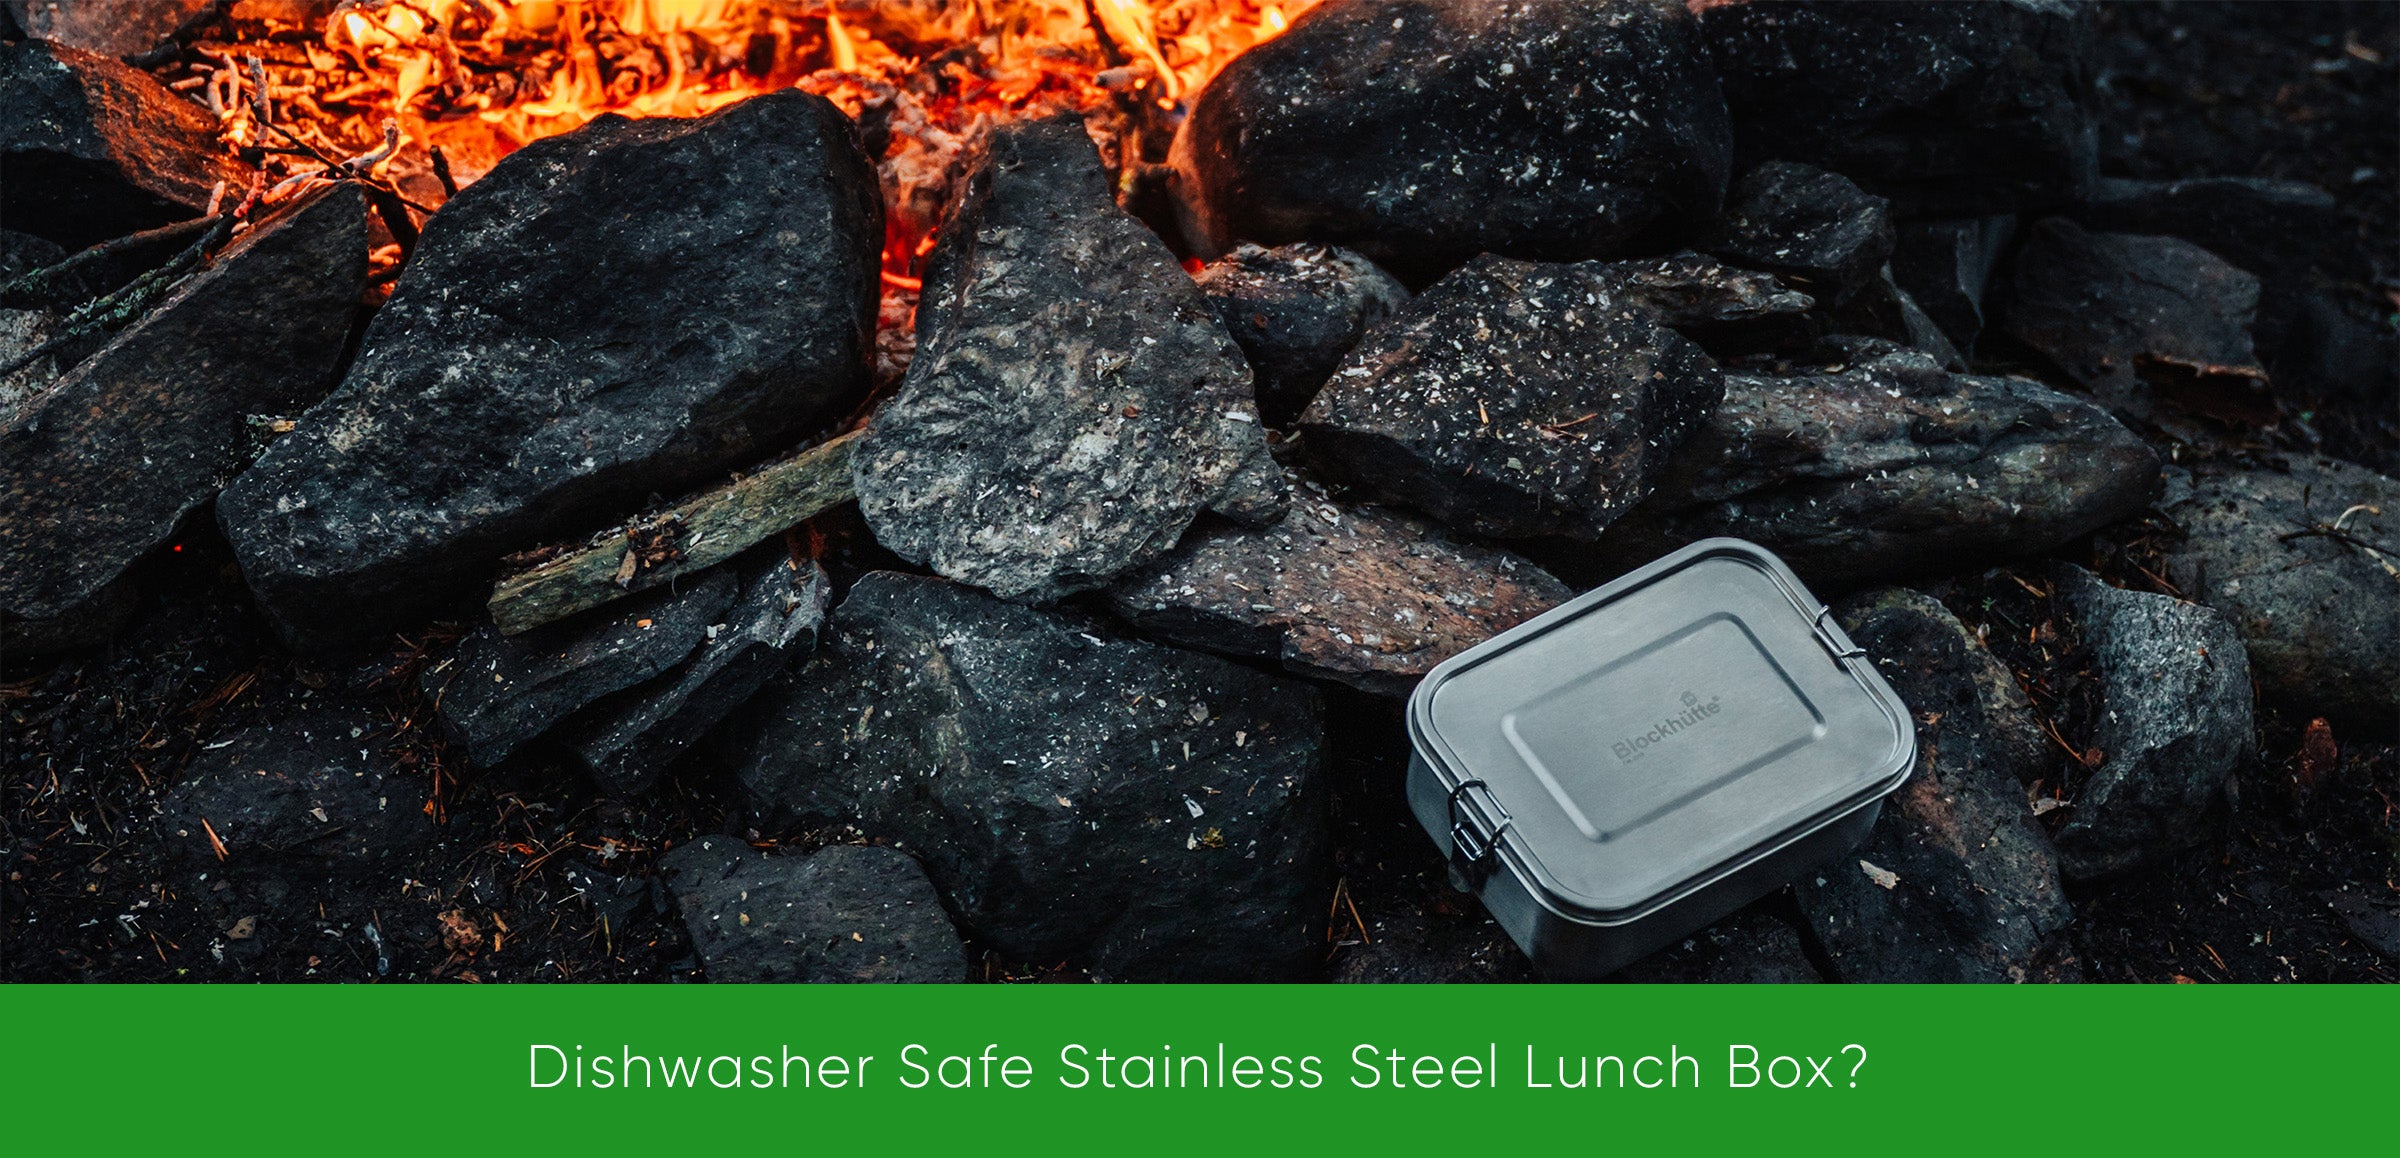 Dishwasher-safe Blockhuette stainless steel lunch box infront of a bofire